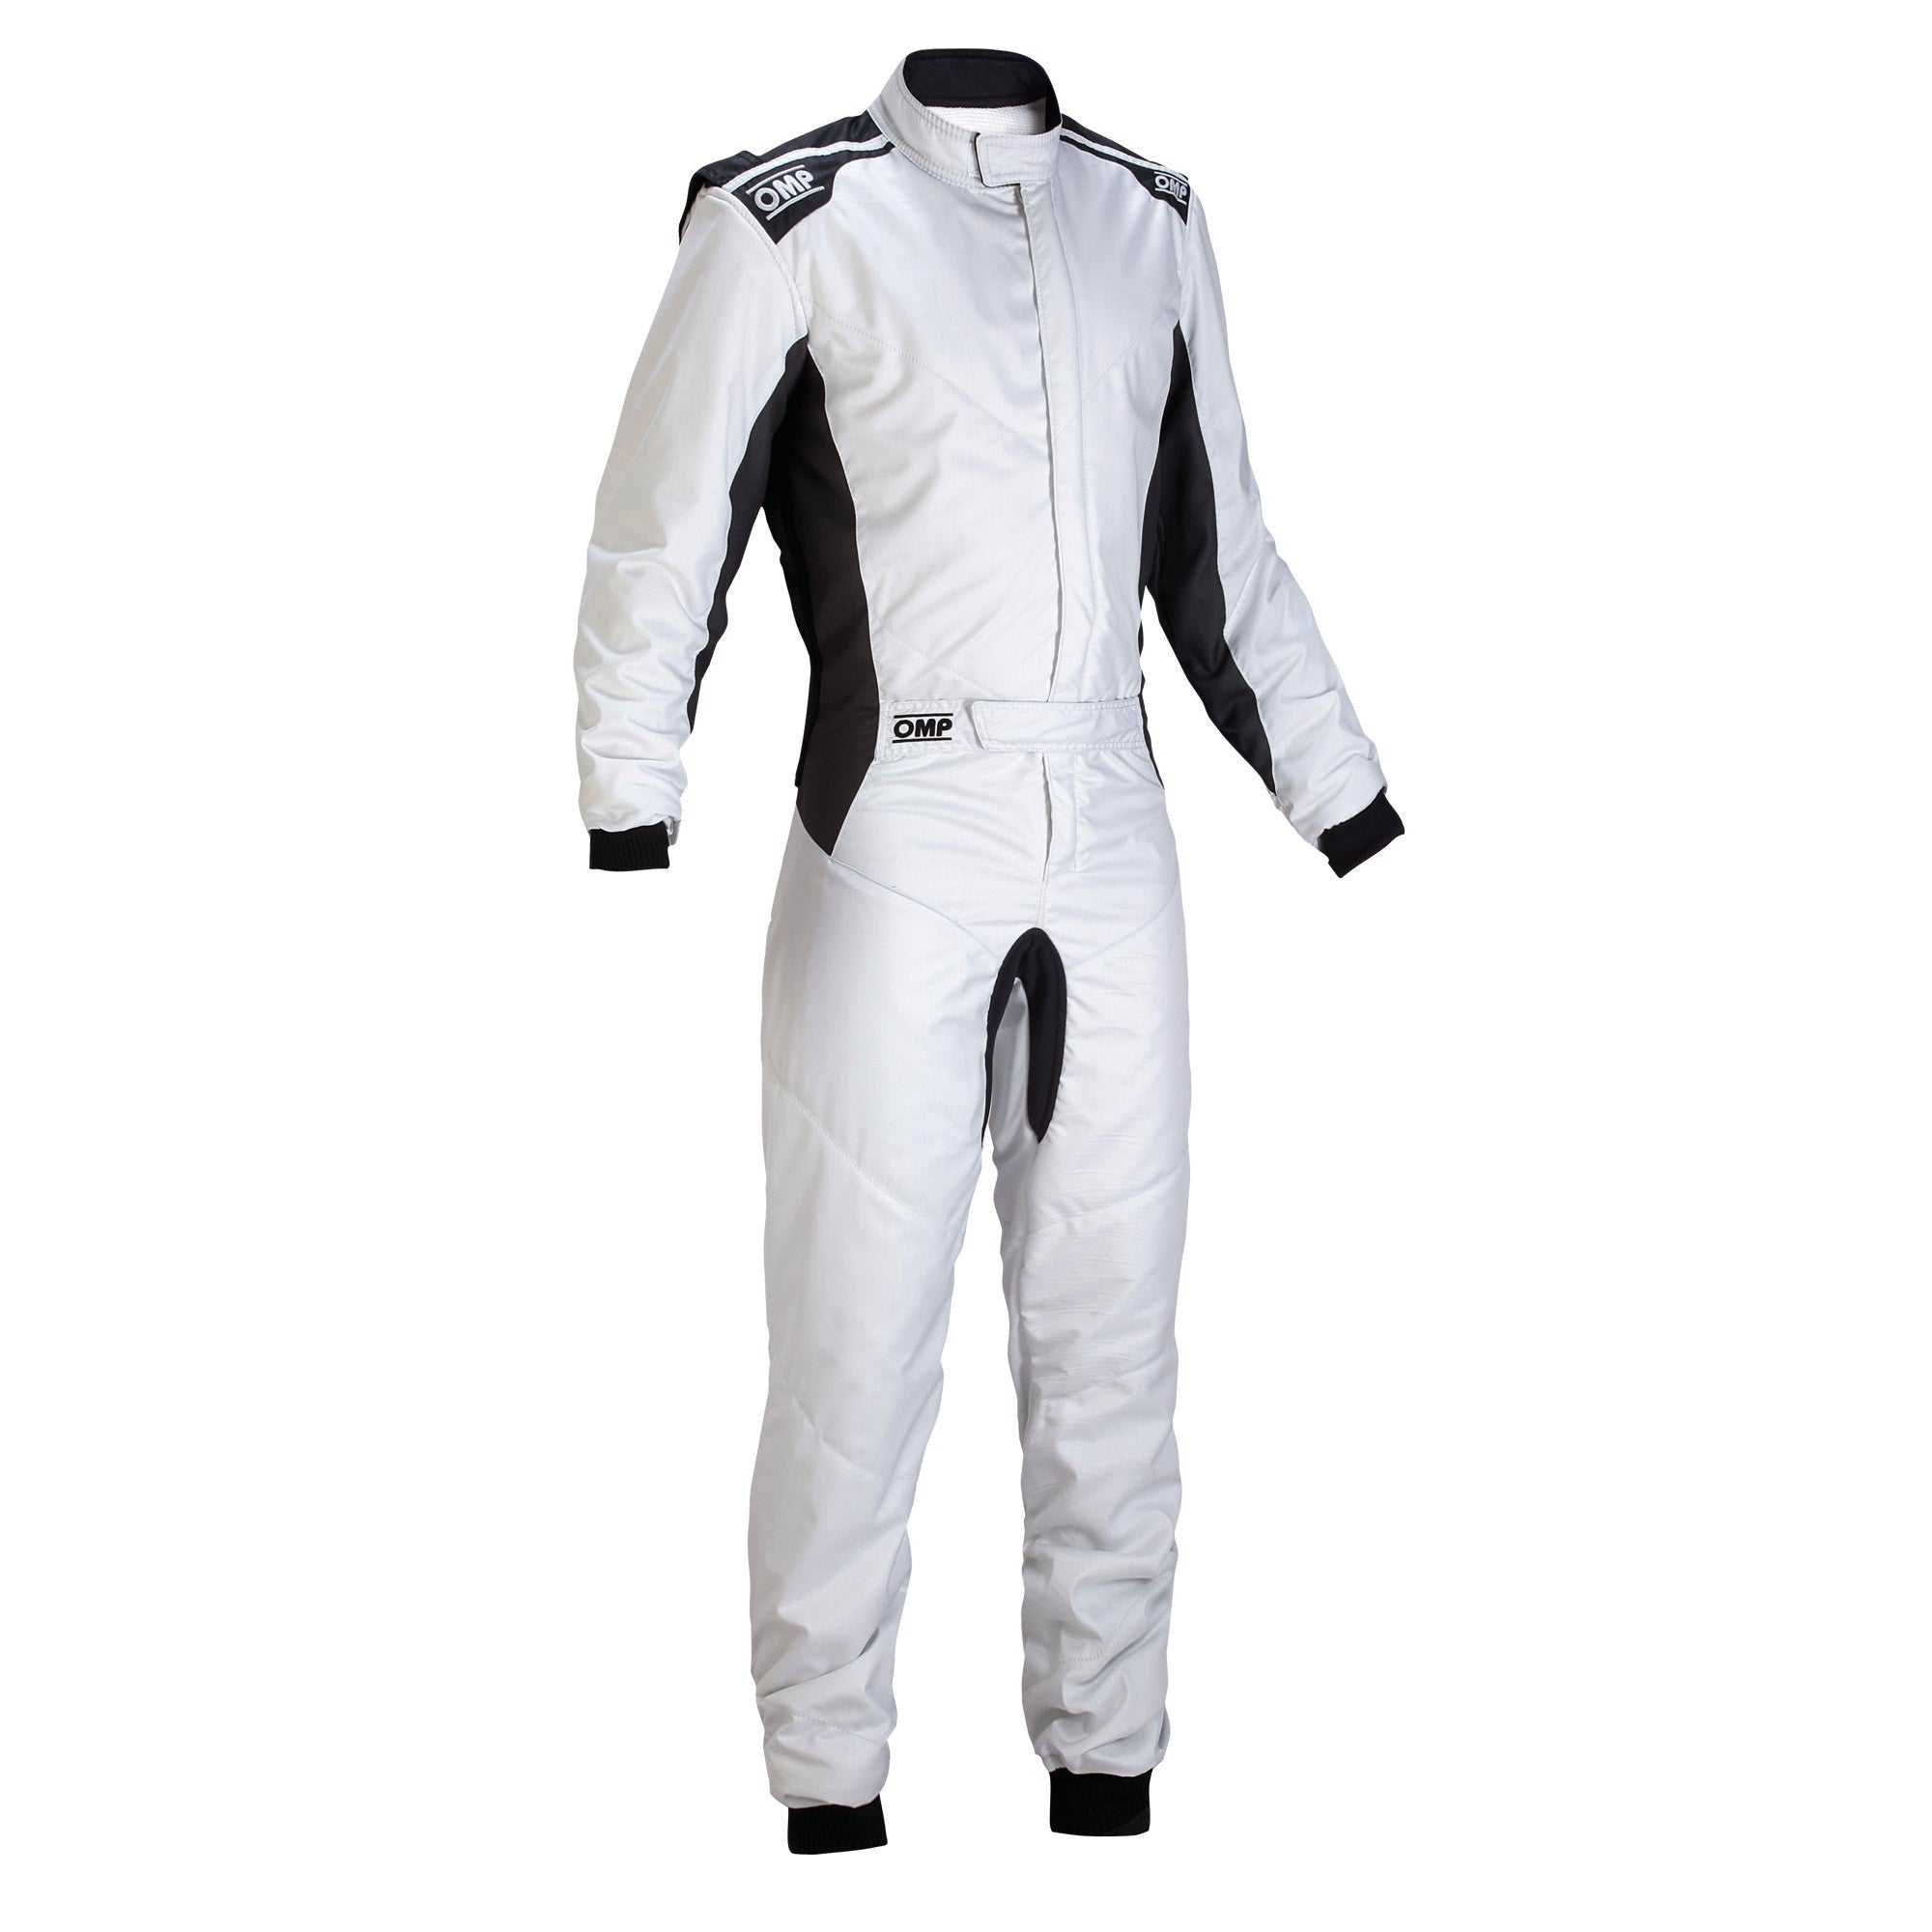 OMP One-S Racing Suit